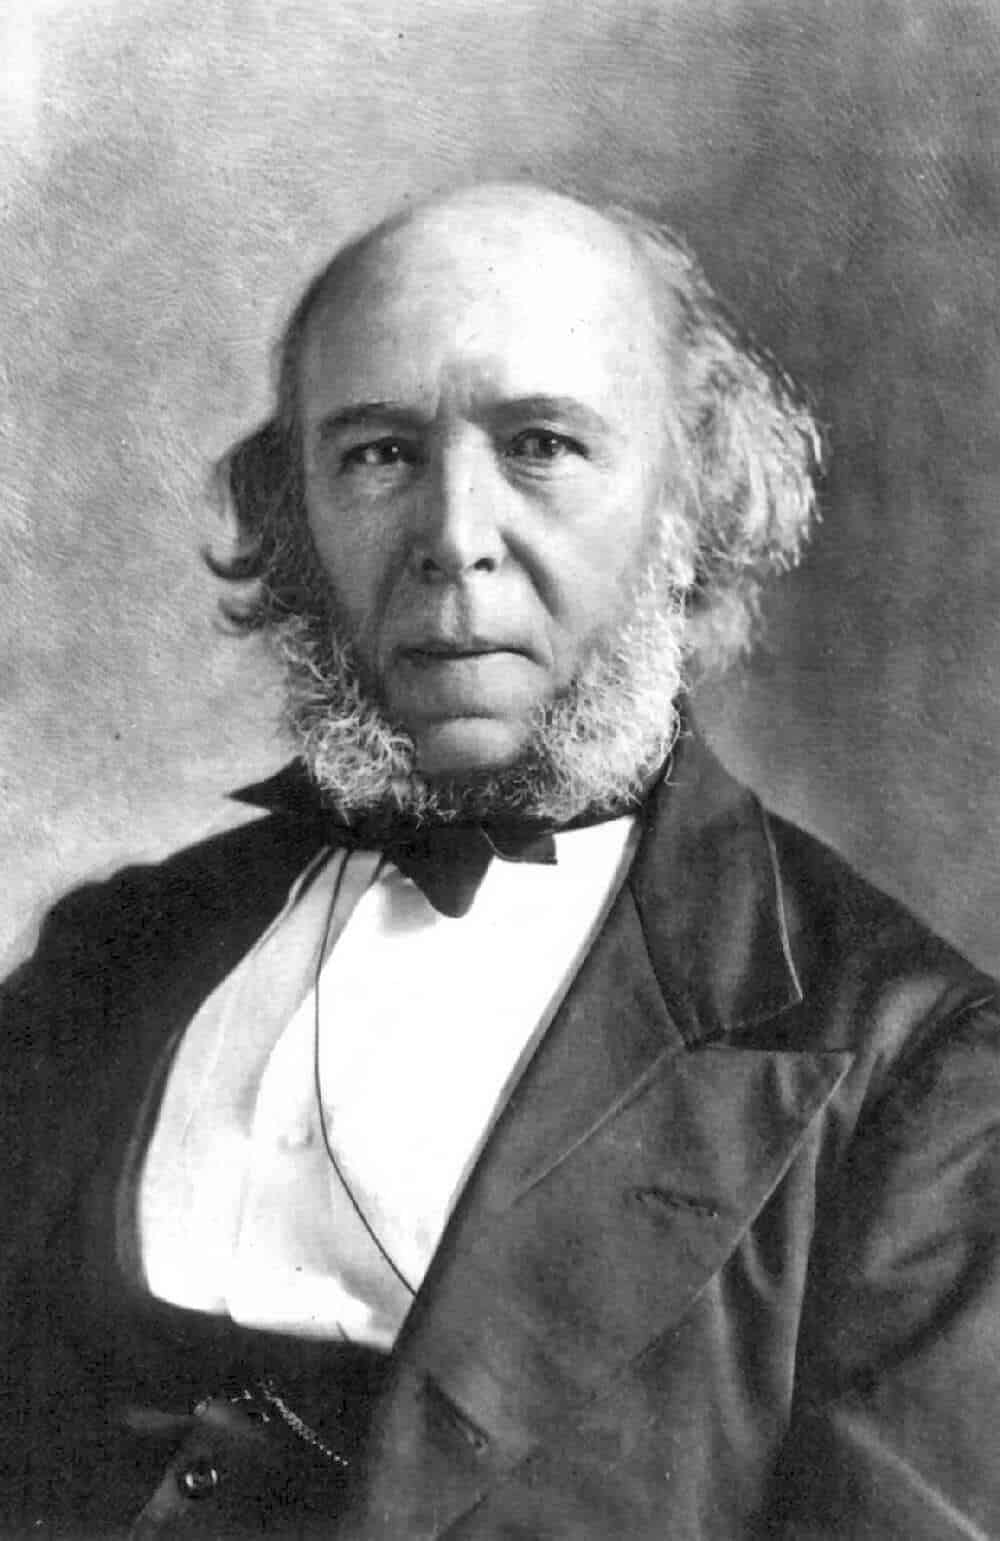 A portrati of Herbert Spencer for the blog post on eugennics and social Darwinism